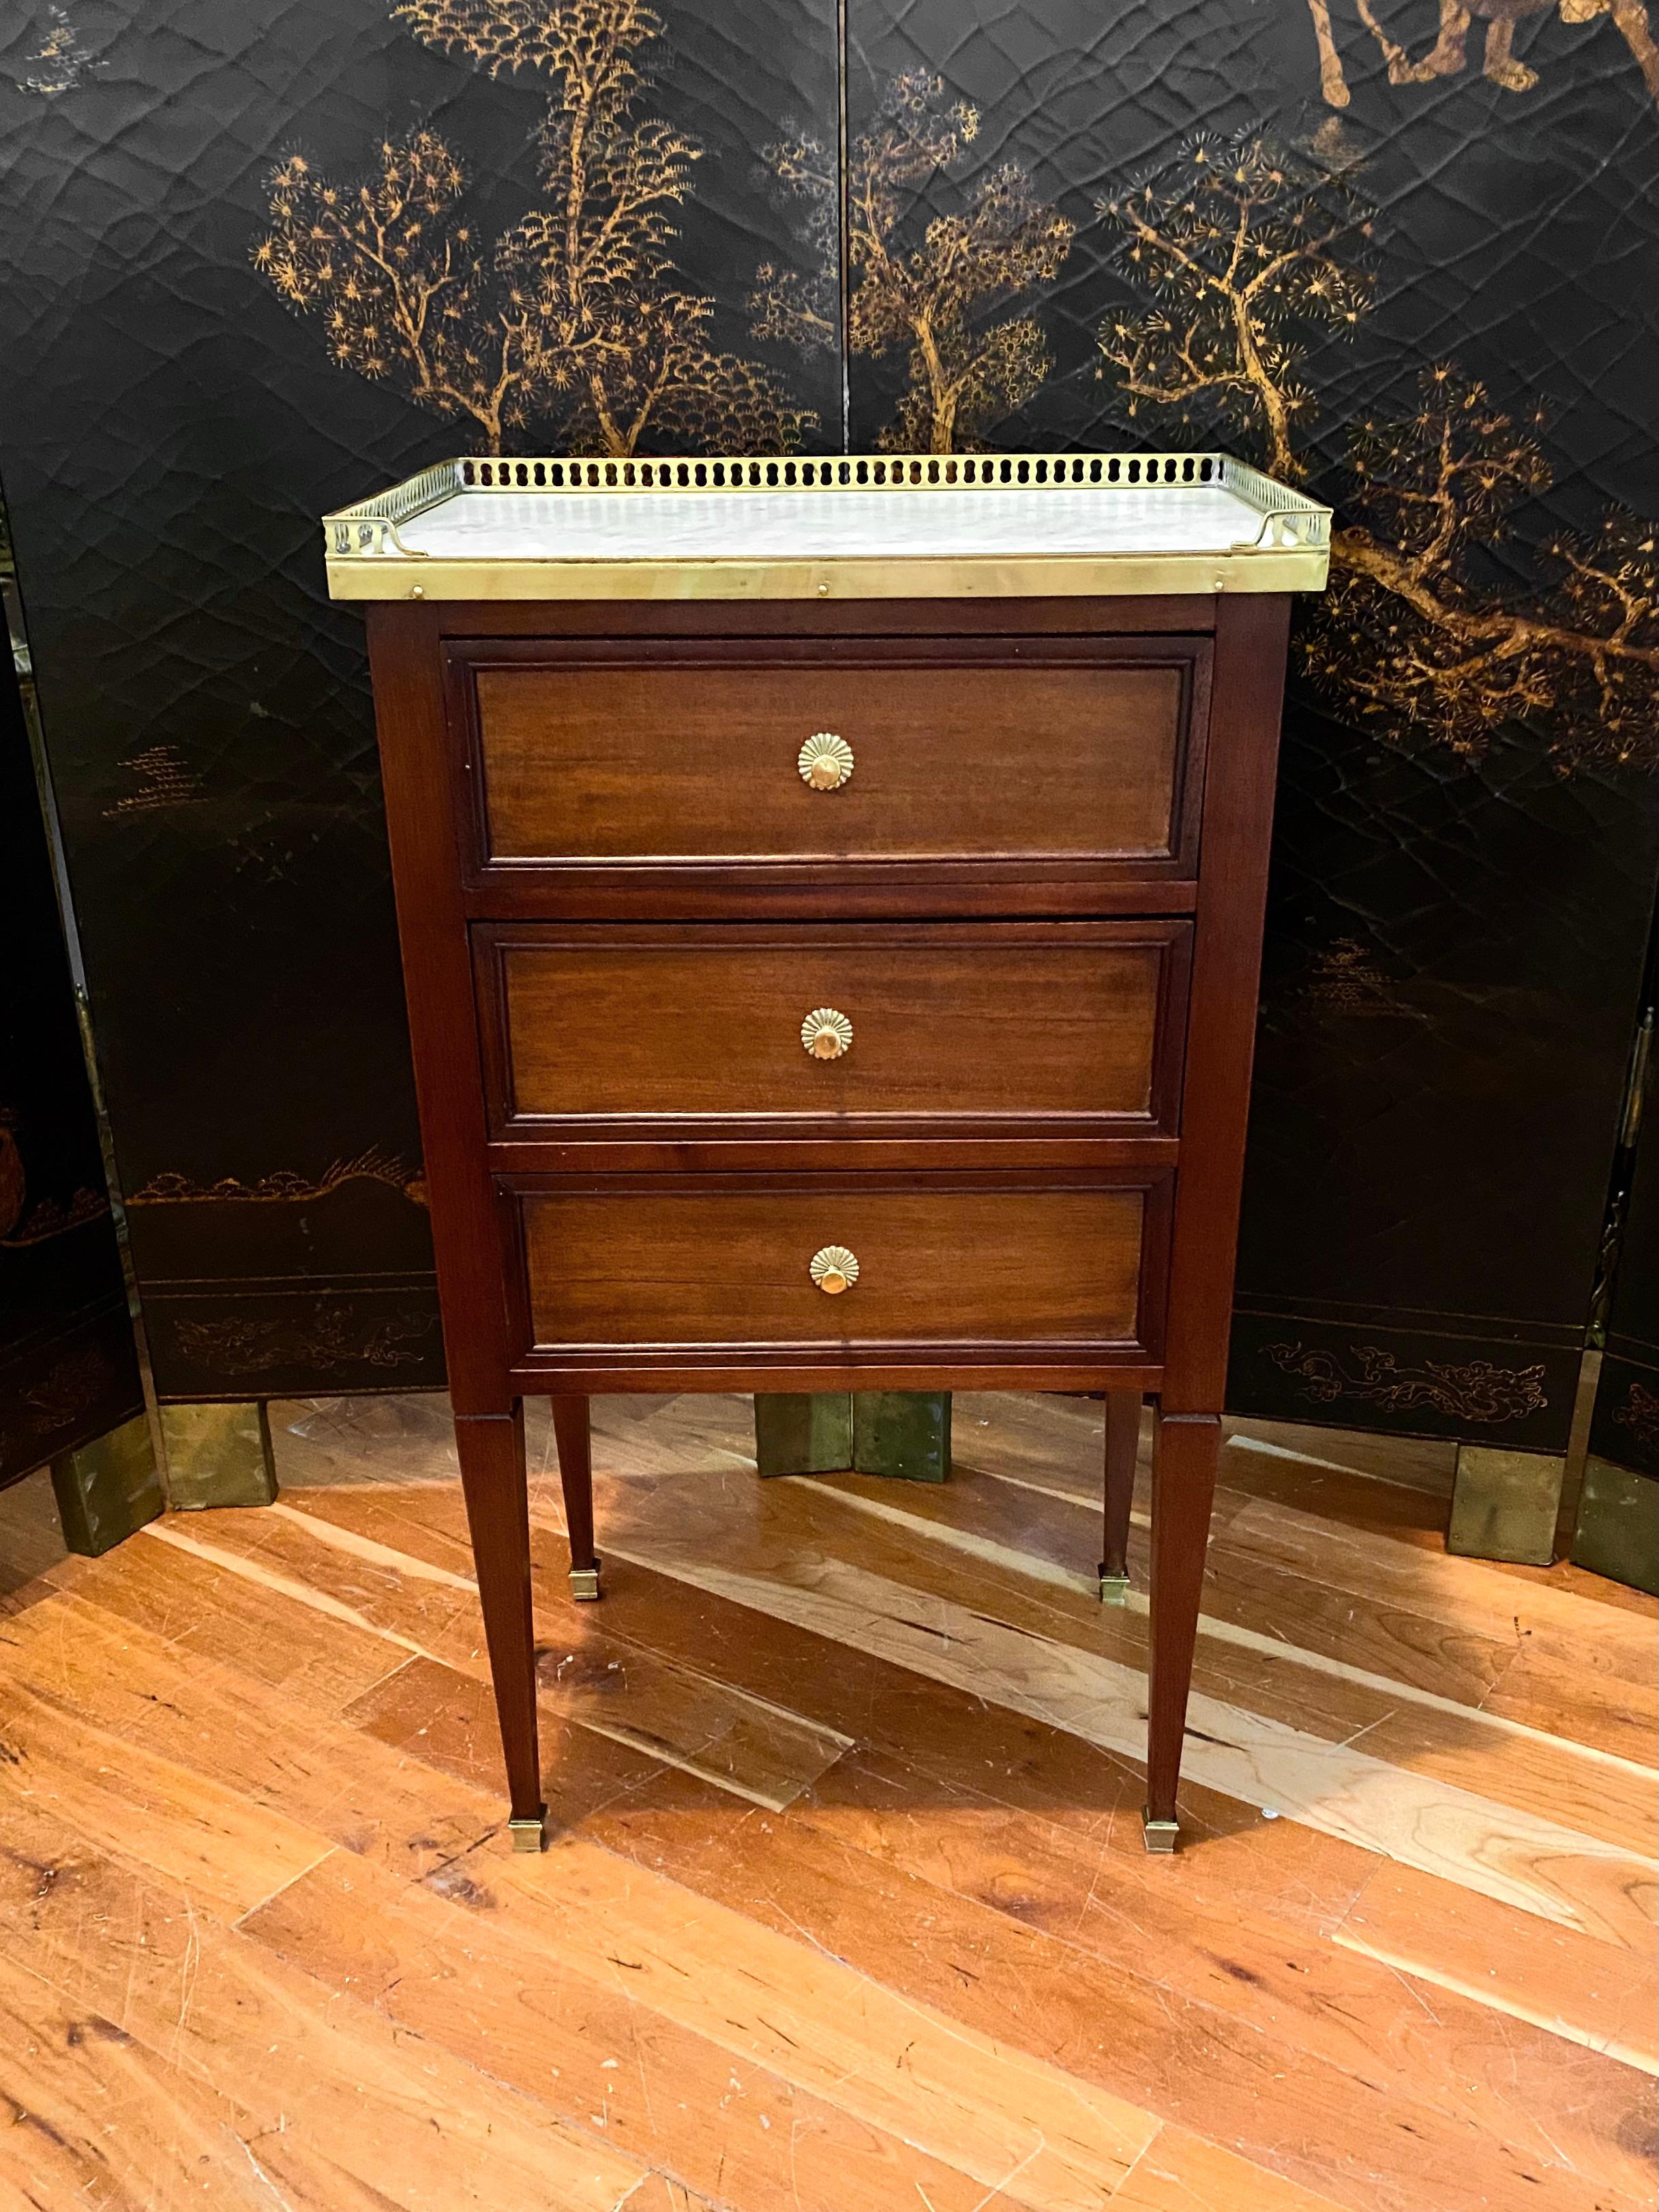 Louis XVI Style cabinet or commode chest of drawers style nightstand with marble top and bronze gallery. 
White marble top surrounded by a bronze pierced gallery. The cabinet is fronted by three drawers. It is mounted on four Louis XVI Style legs